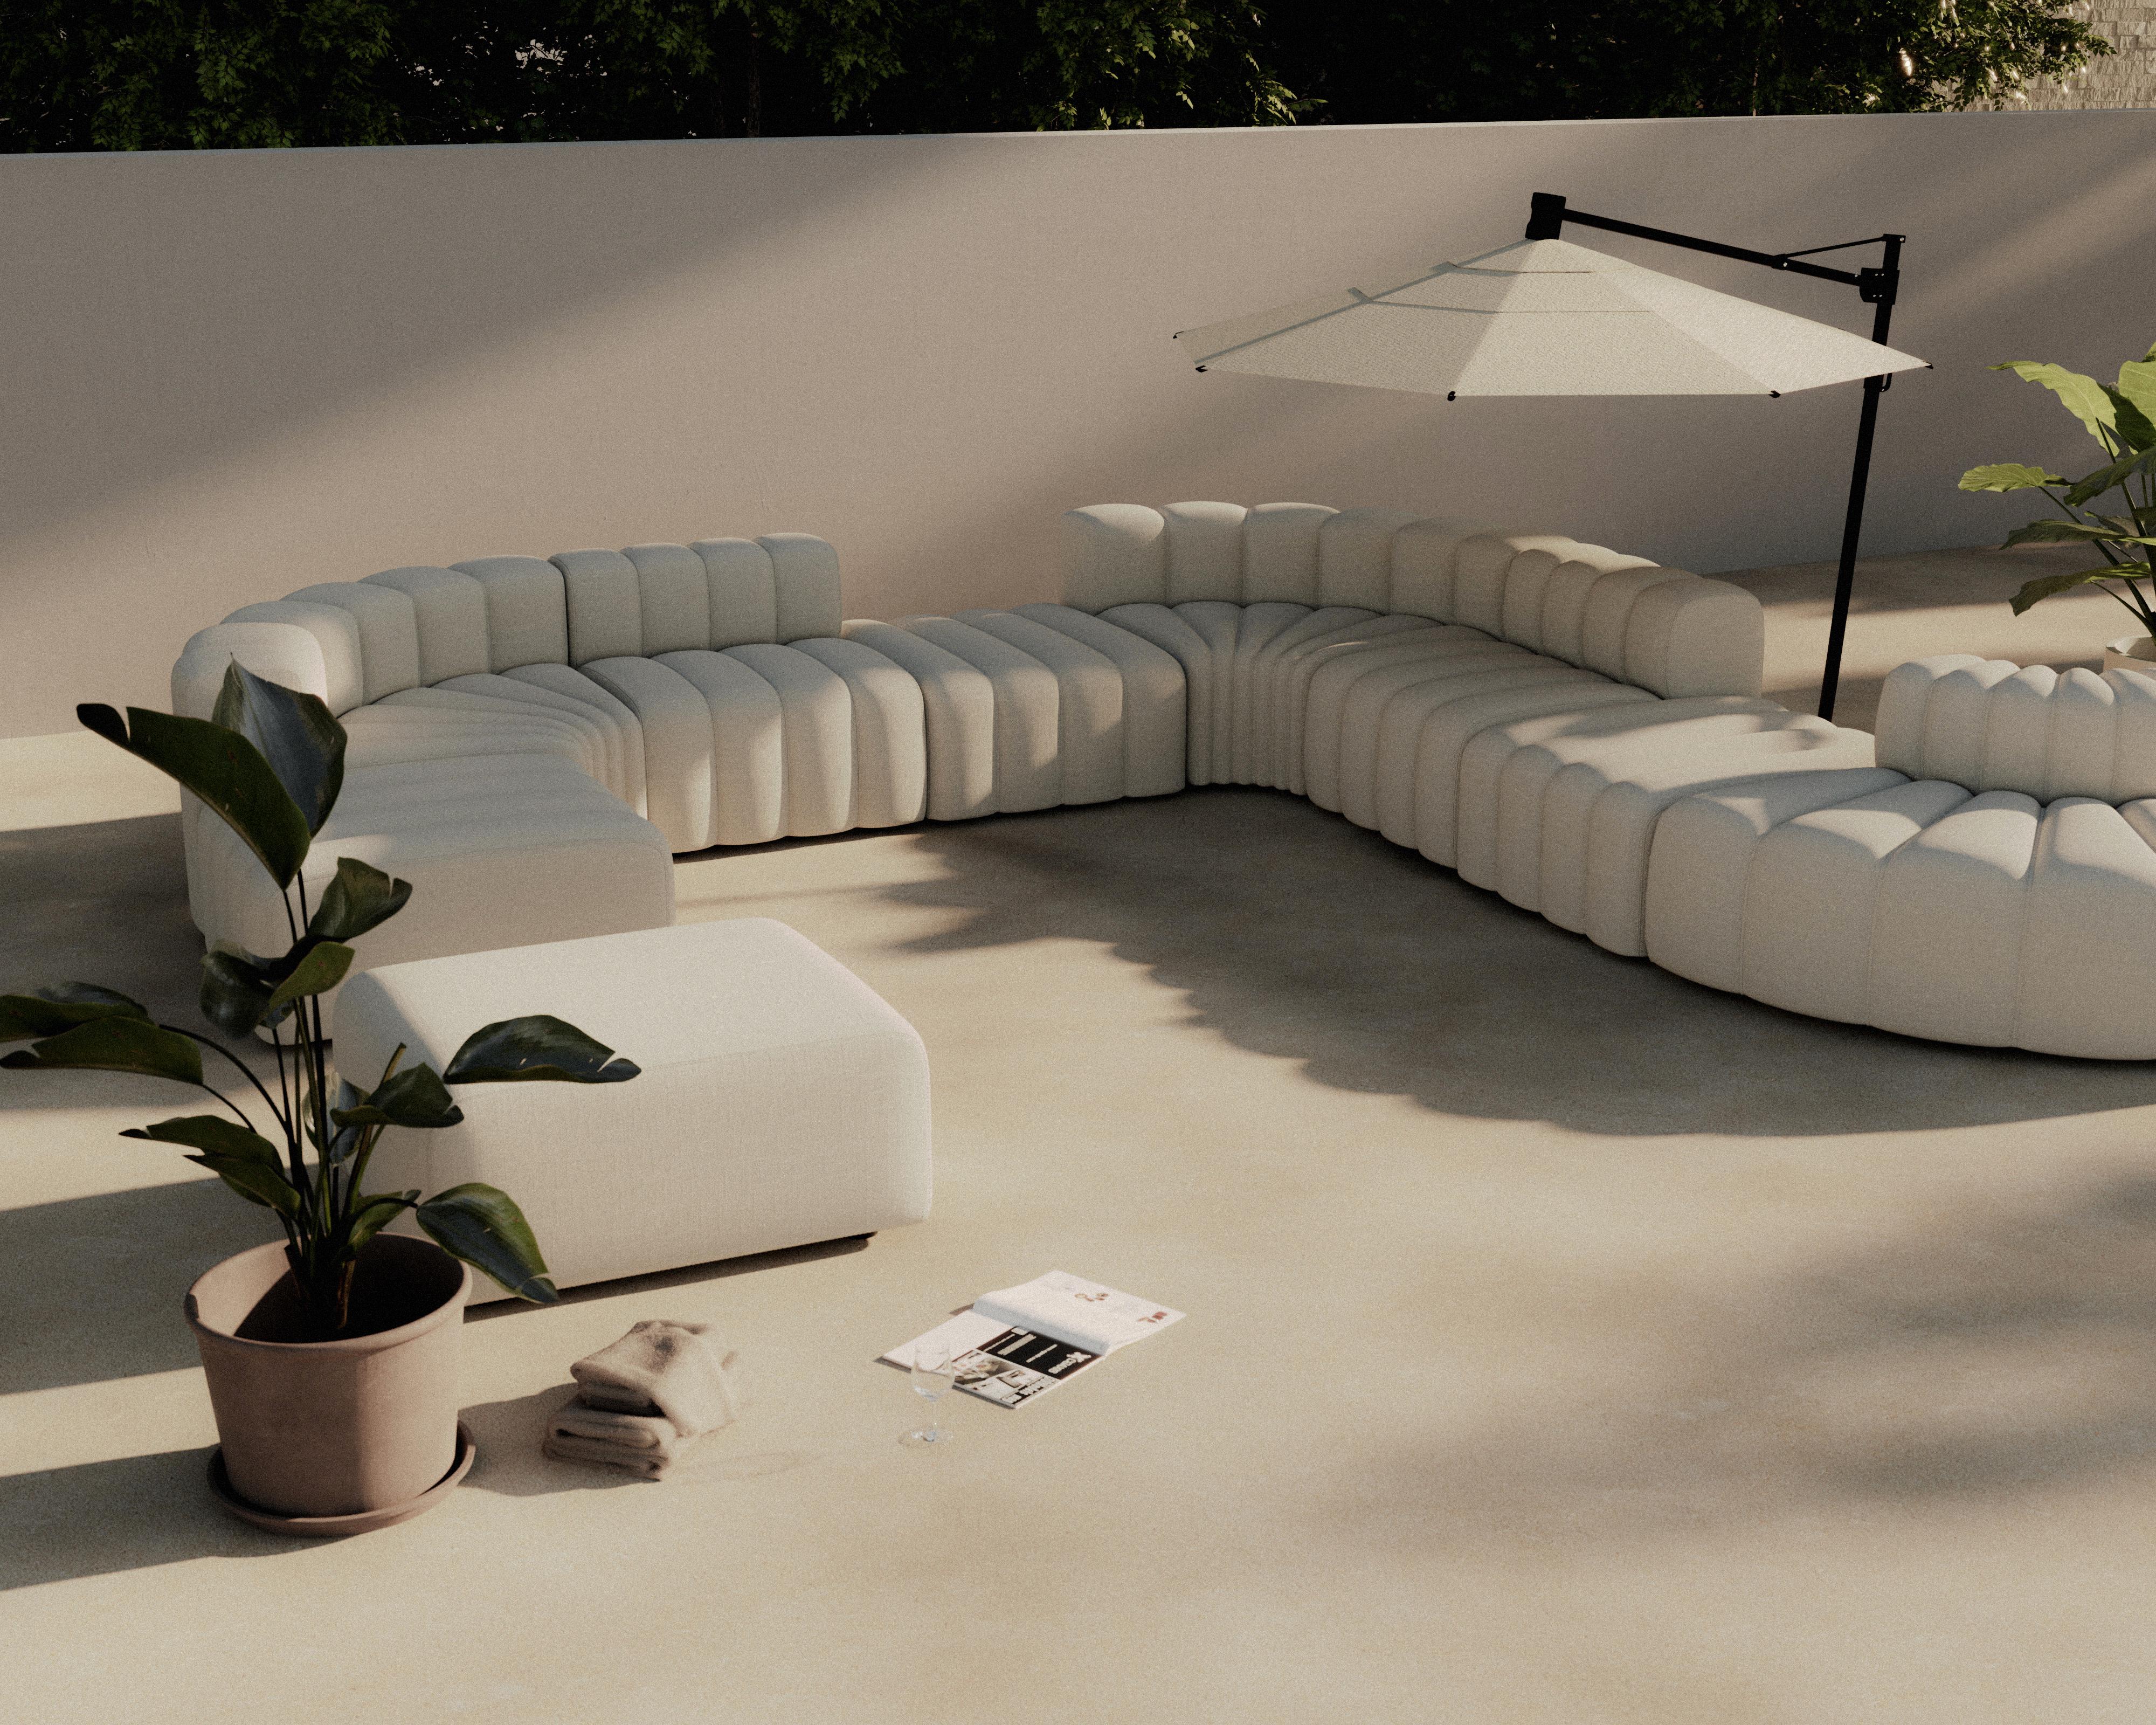 Outdoor Ottoman 'Studio' by Norr11, Modular Sofa, Classic, Whisper For Sale 3